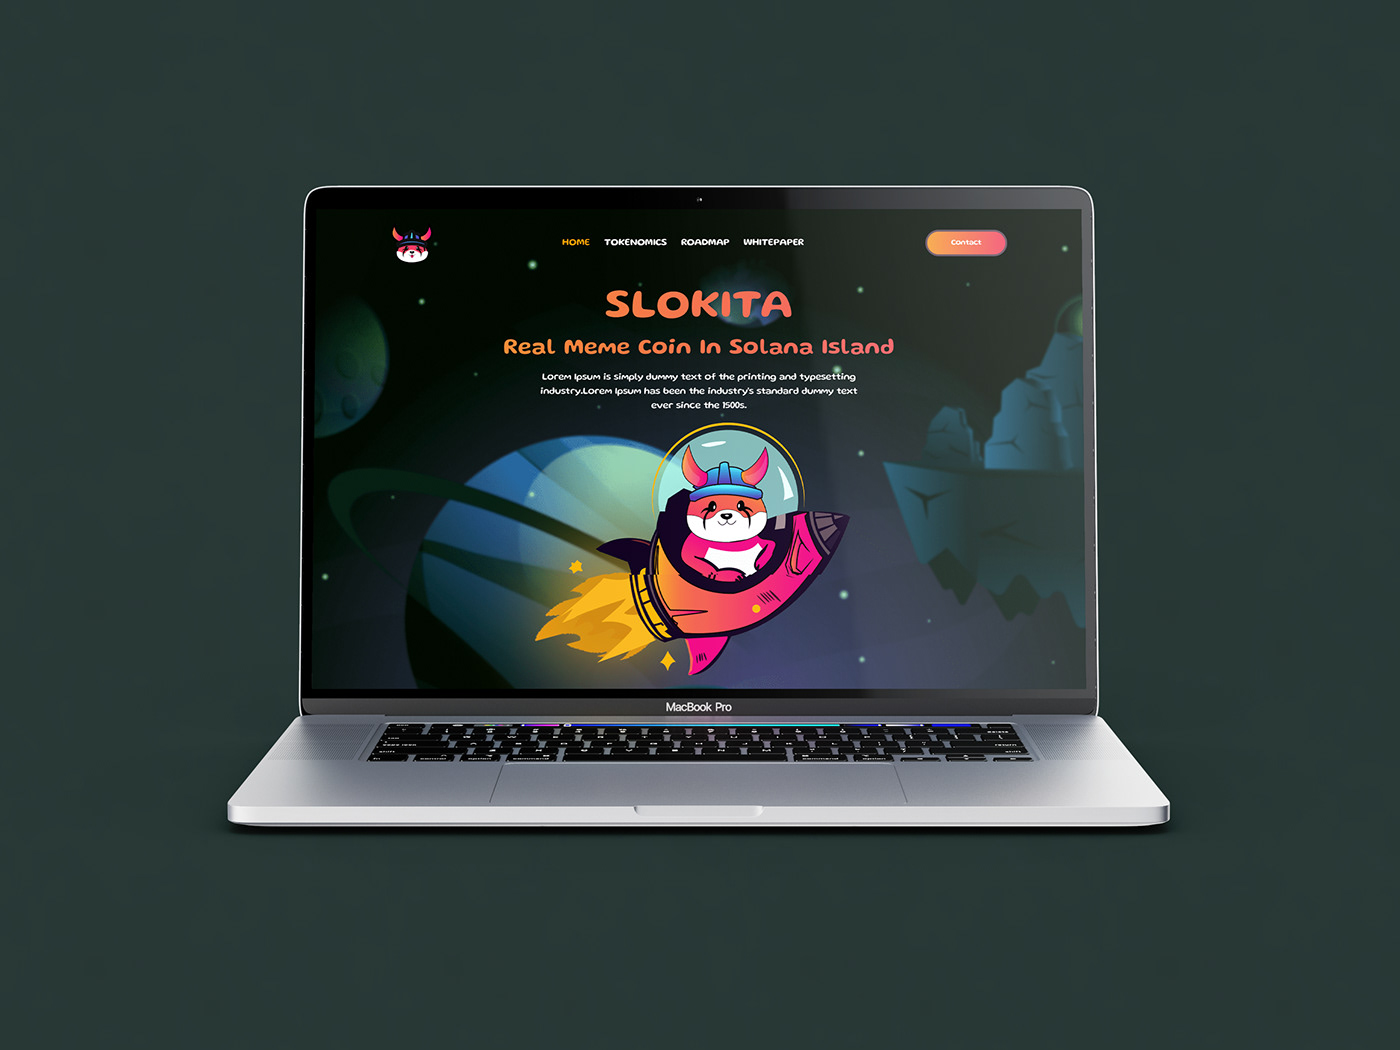 figma to html figma design bootstrap Web designer html5 css Responsive landing page jquery HTML conversion